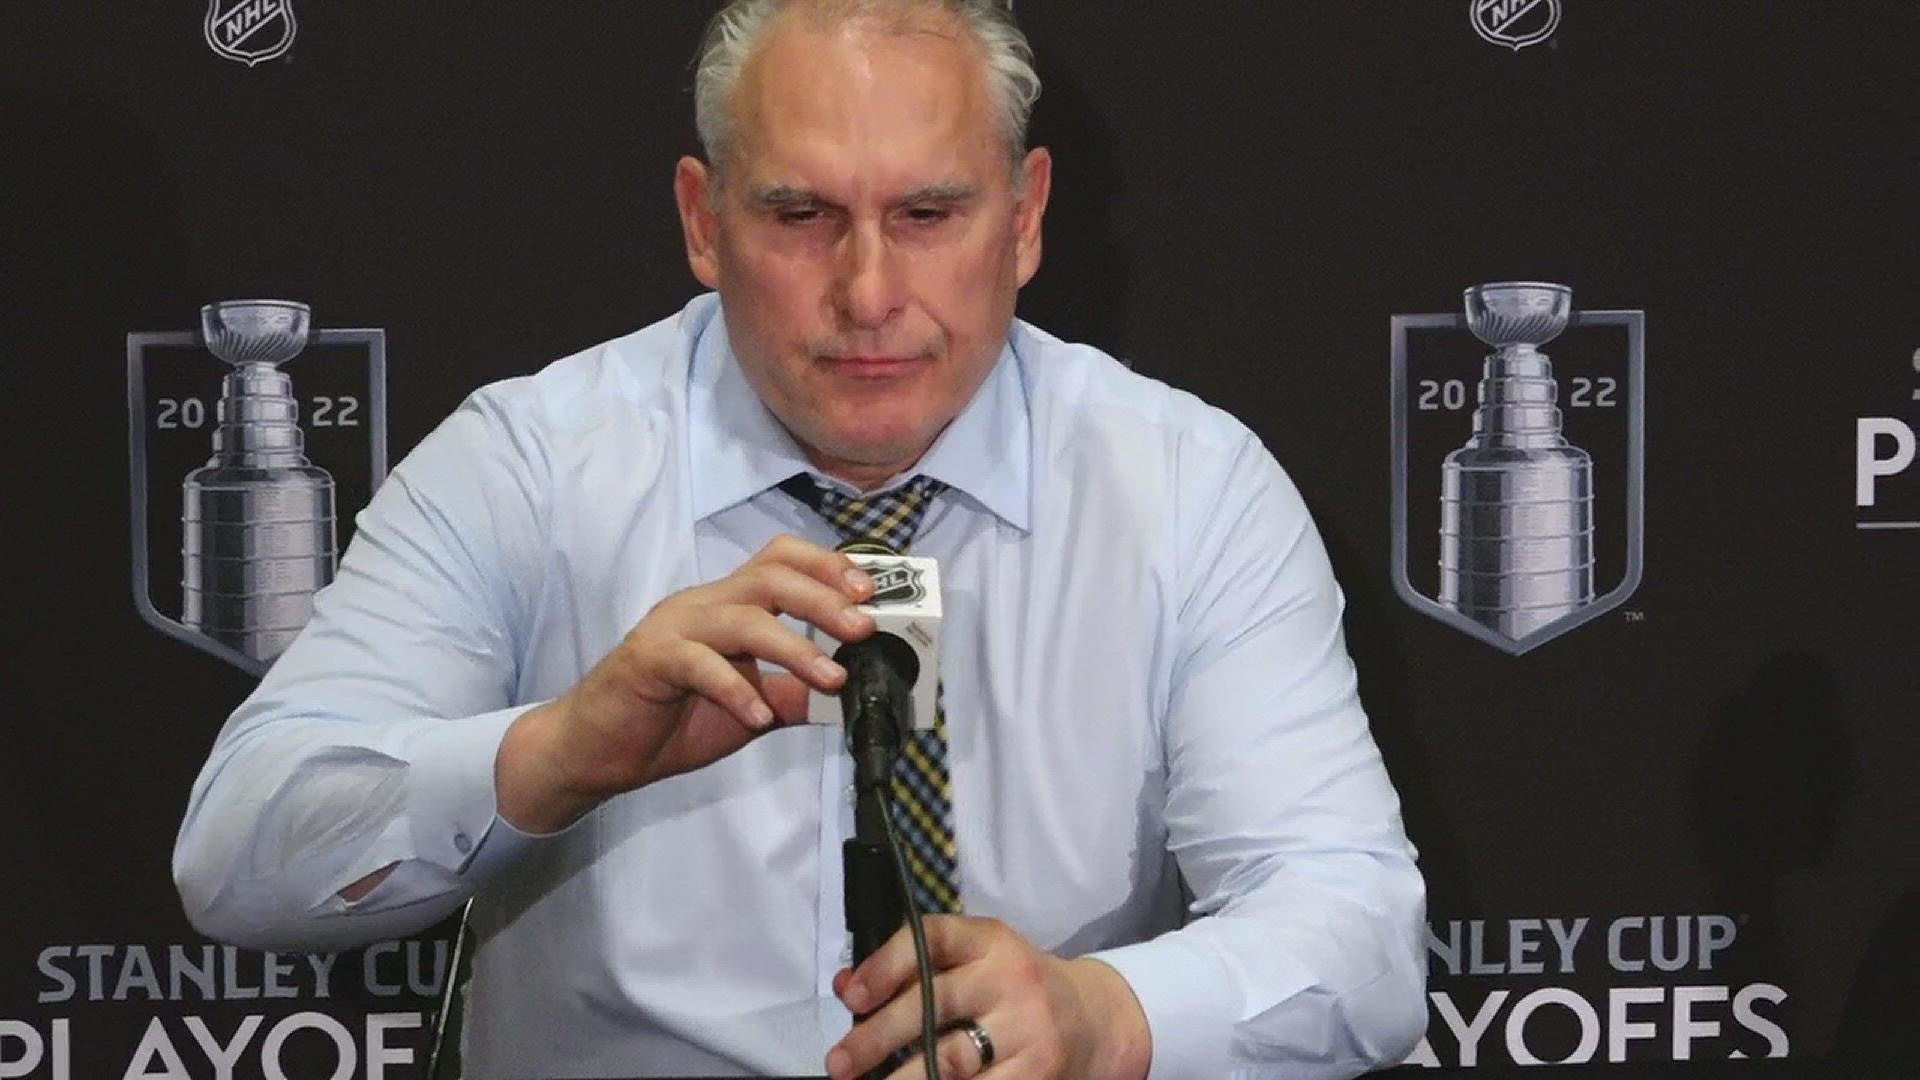 St. Louis Blues Head Coach Craig Berube shares updates in the Game 2 loss versus the Minnesota Wild in NHL playoffs.